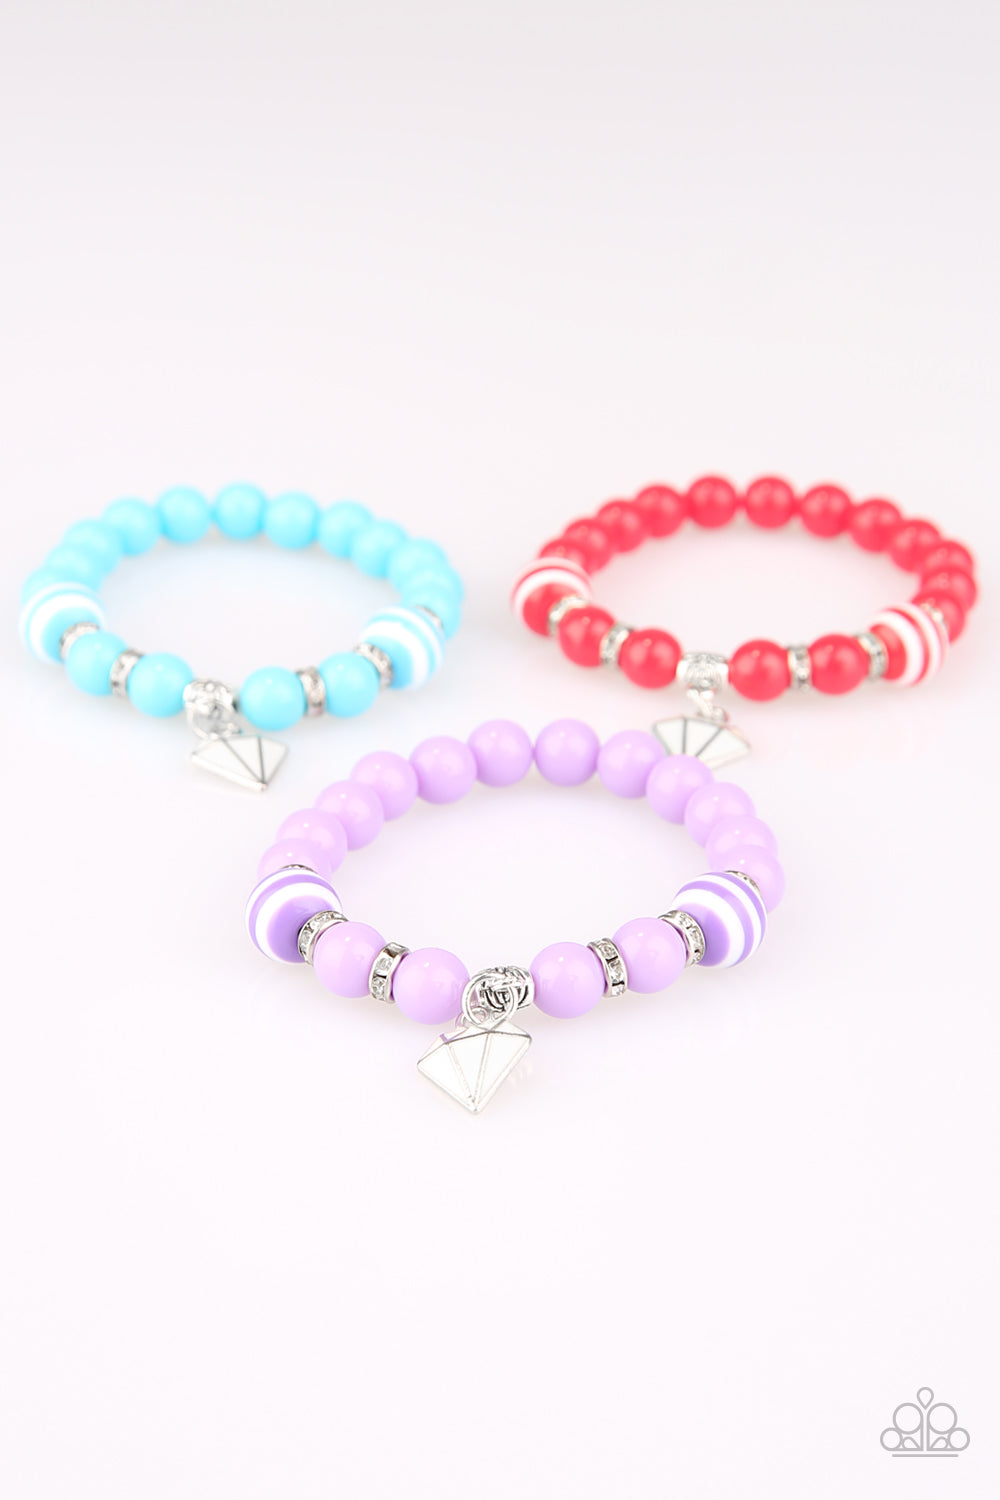 Paparazzi Starlet Shimmer Bracelets - Blue, Purple, Red & Pink with White Diamond Charm - $5 Jewelry With Ashley Swint